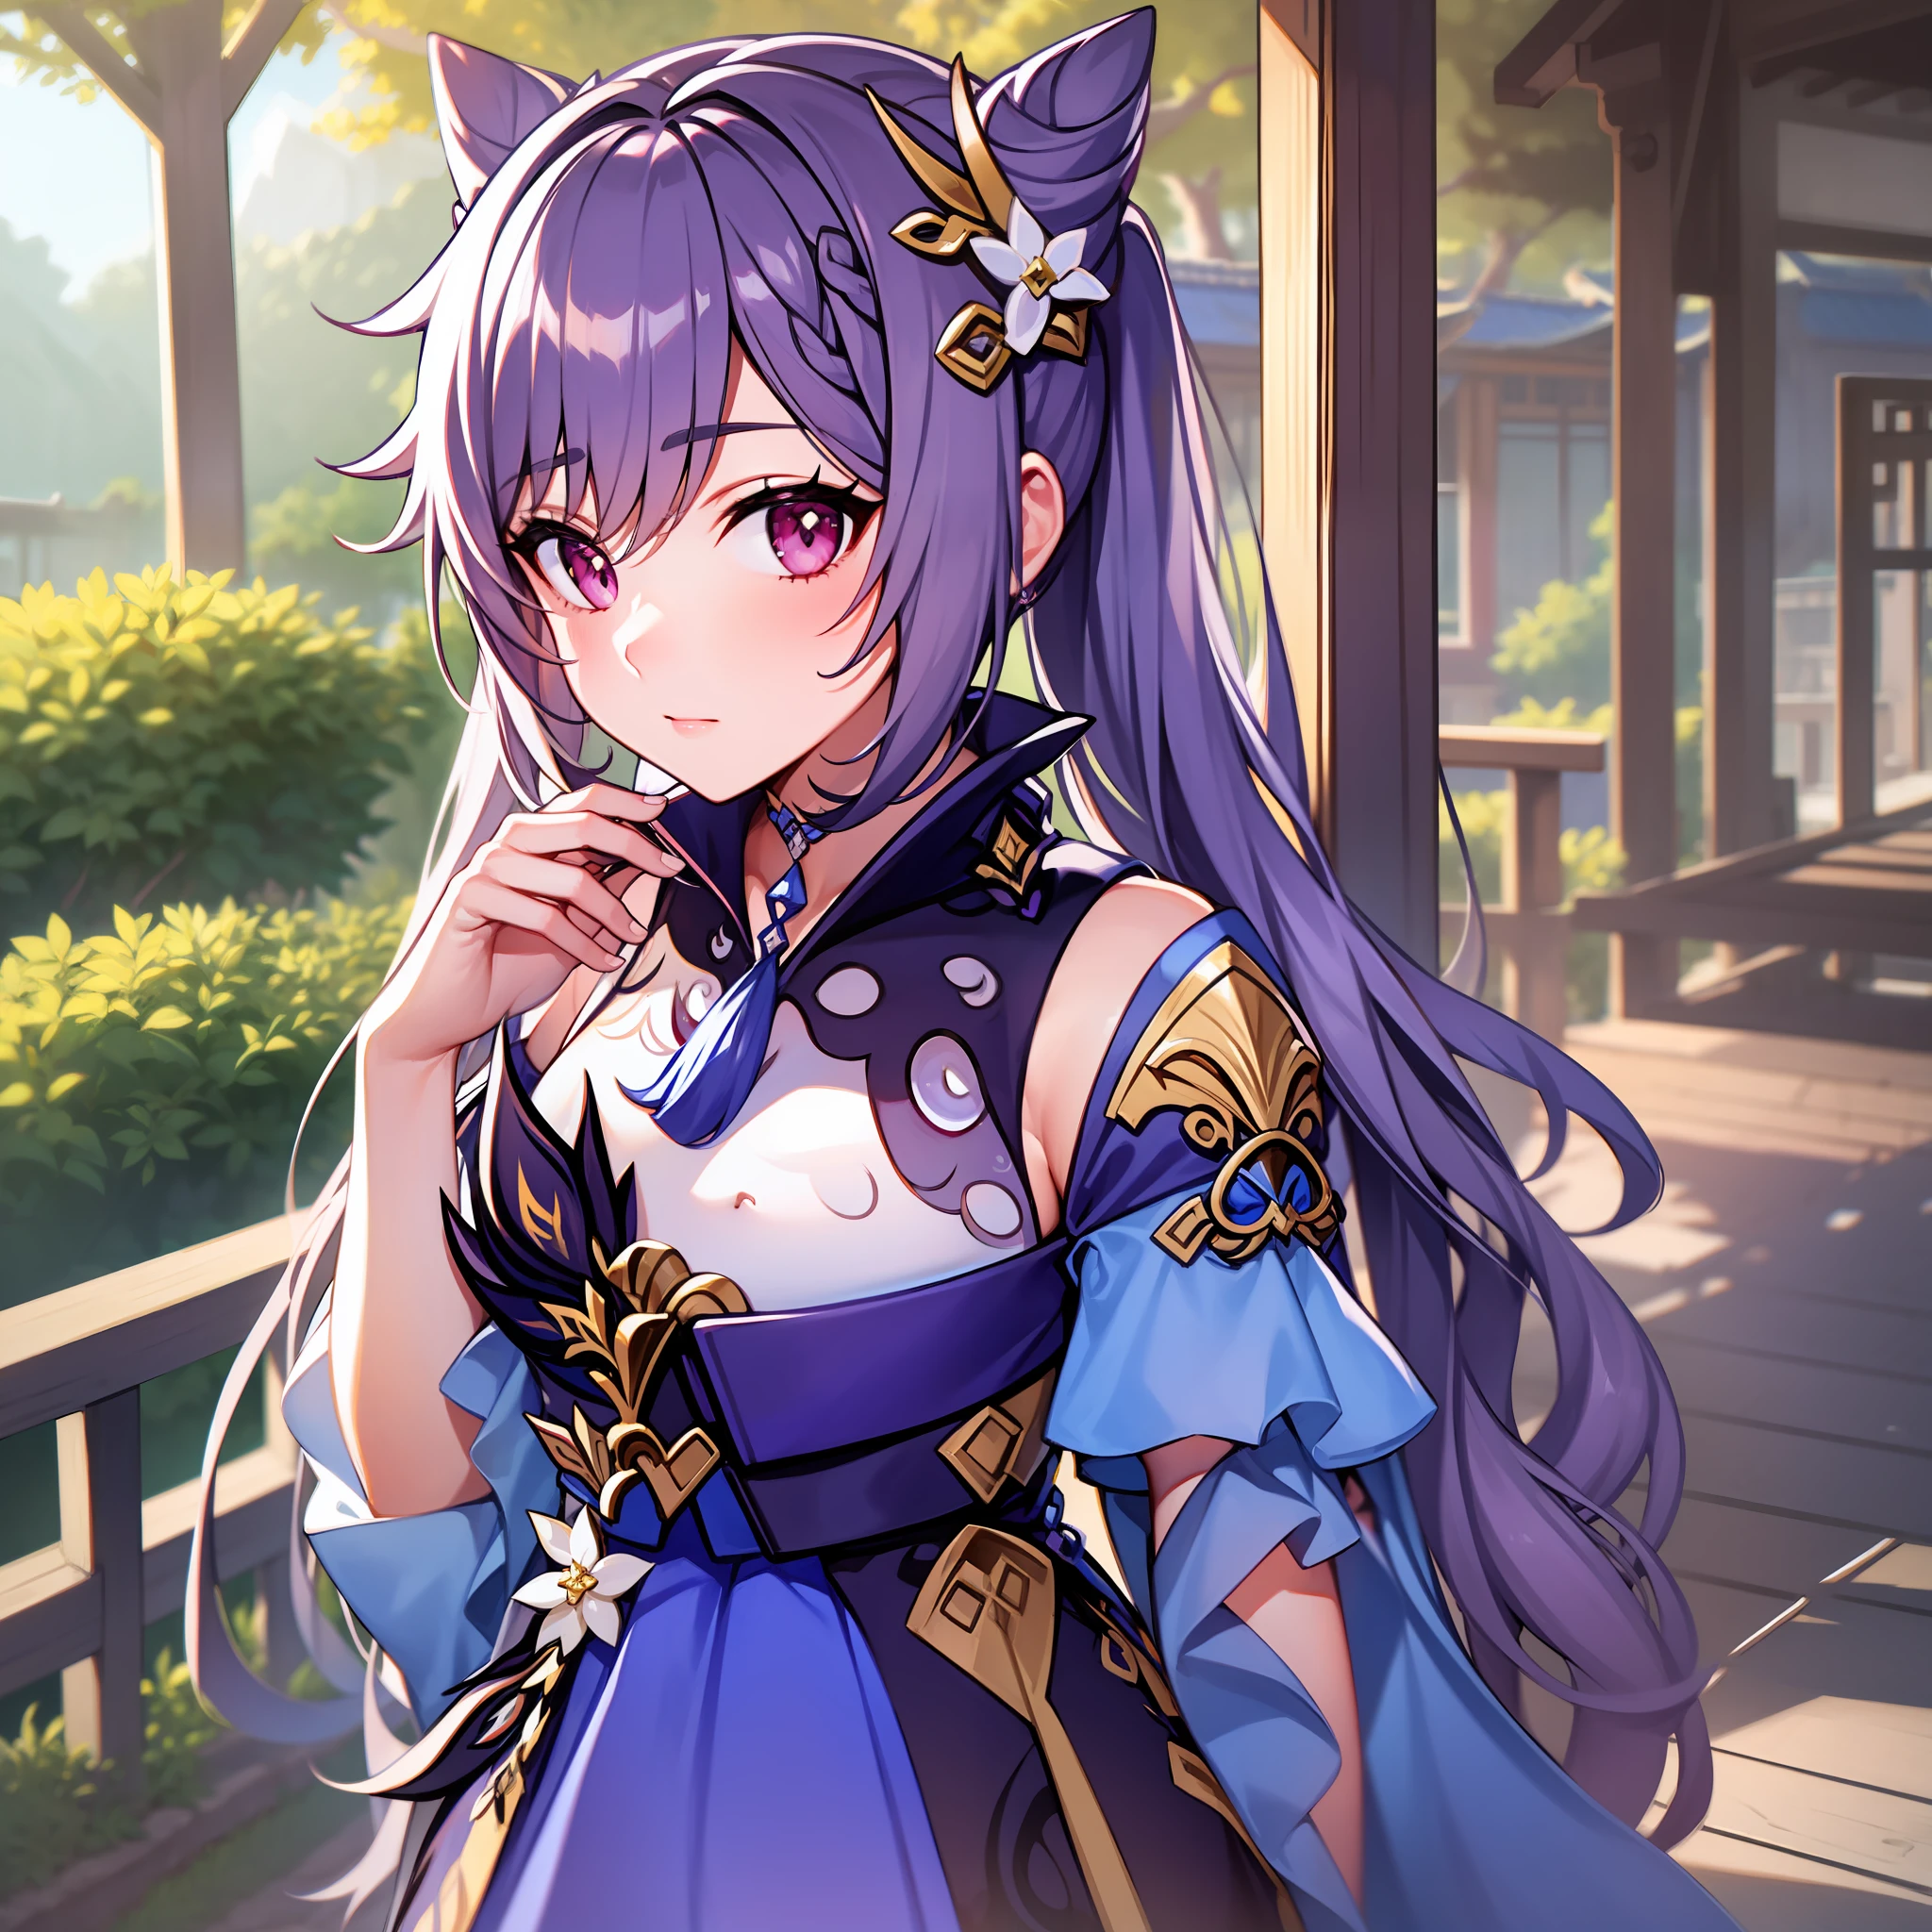 keqing, genshin impact, best quality, Details, ultra HD, Beautiful, tiny, attention, High school shirt, Shy, purple eyes, Purple Hair, Loves me with all his heart, Smiling Warmly at Me, View, Morning, Park, Alone, smile